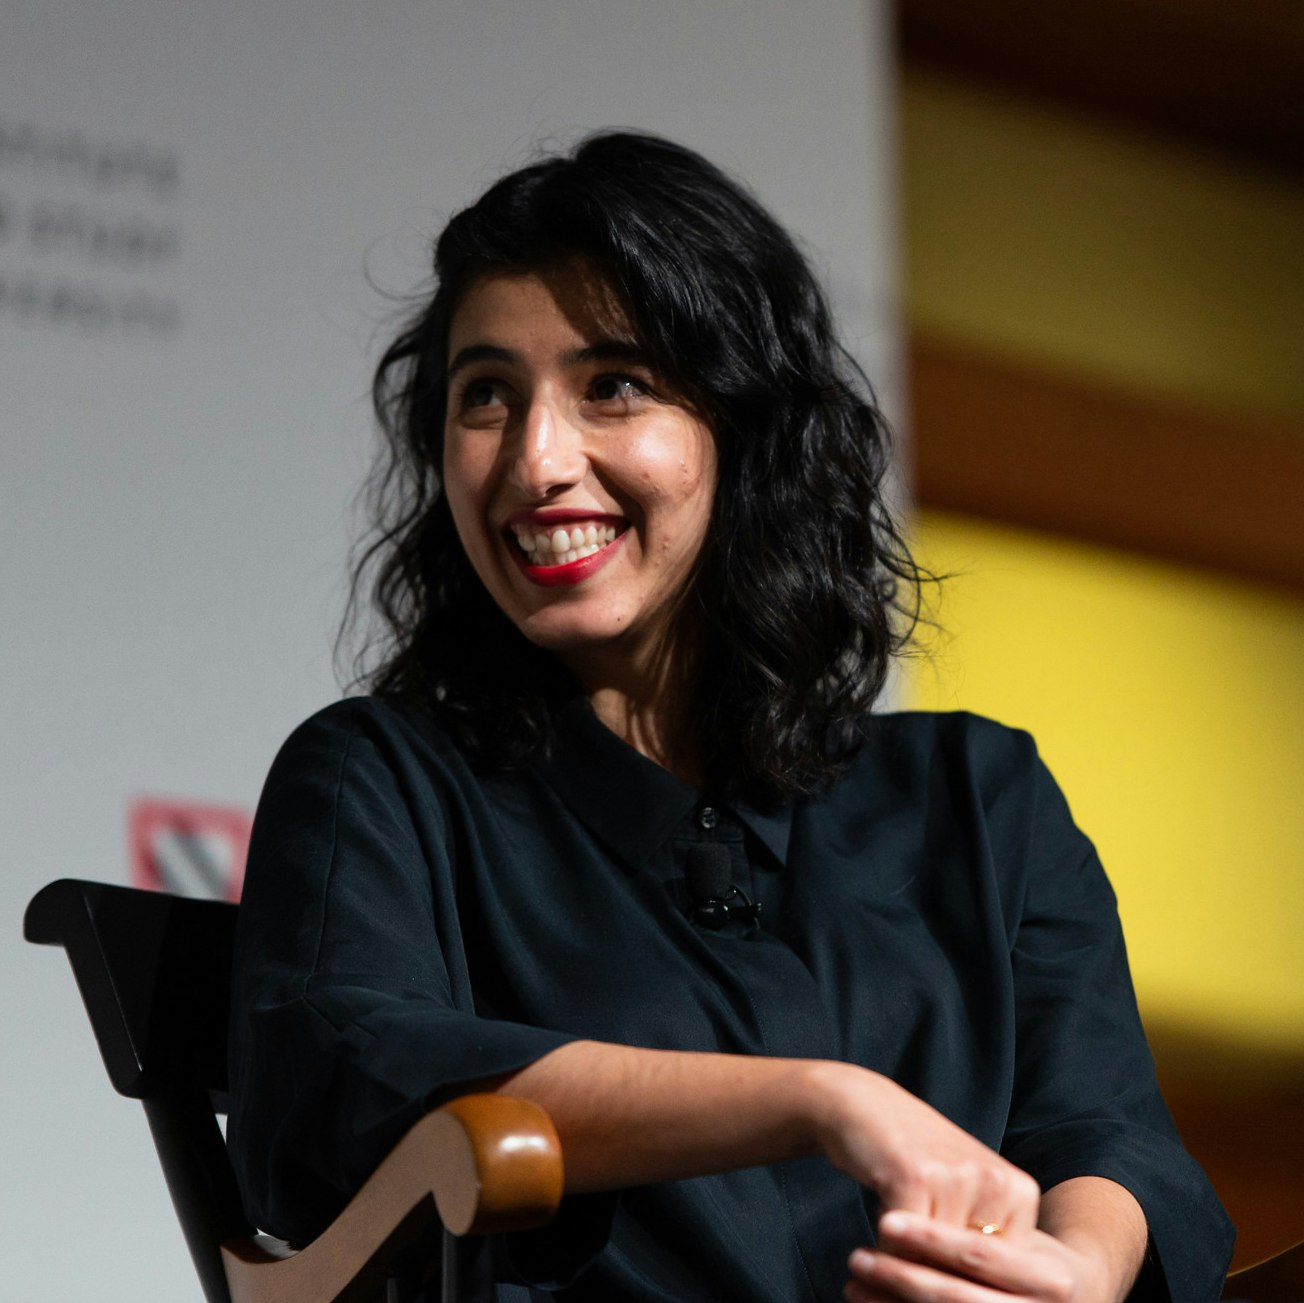 Solmaz Sharif sits on stage and smiles.